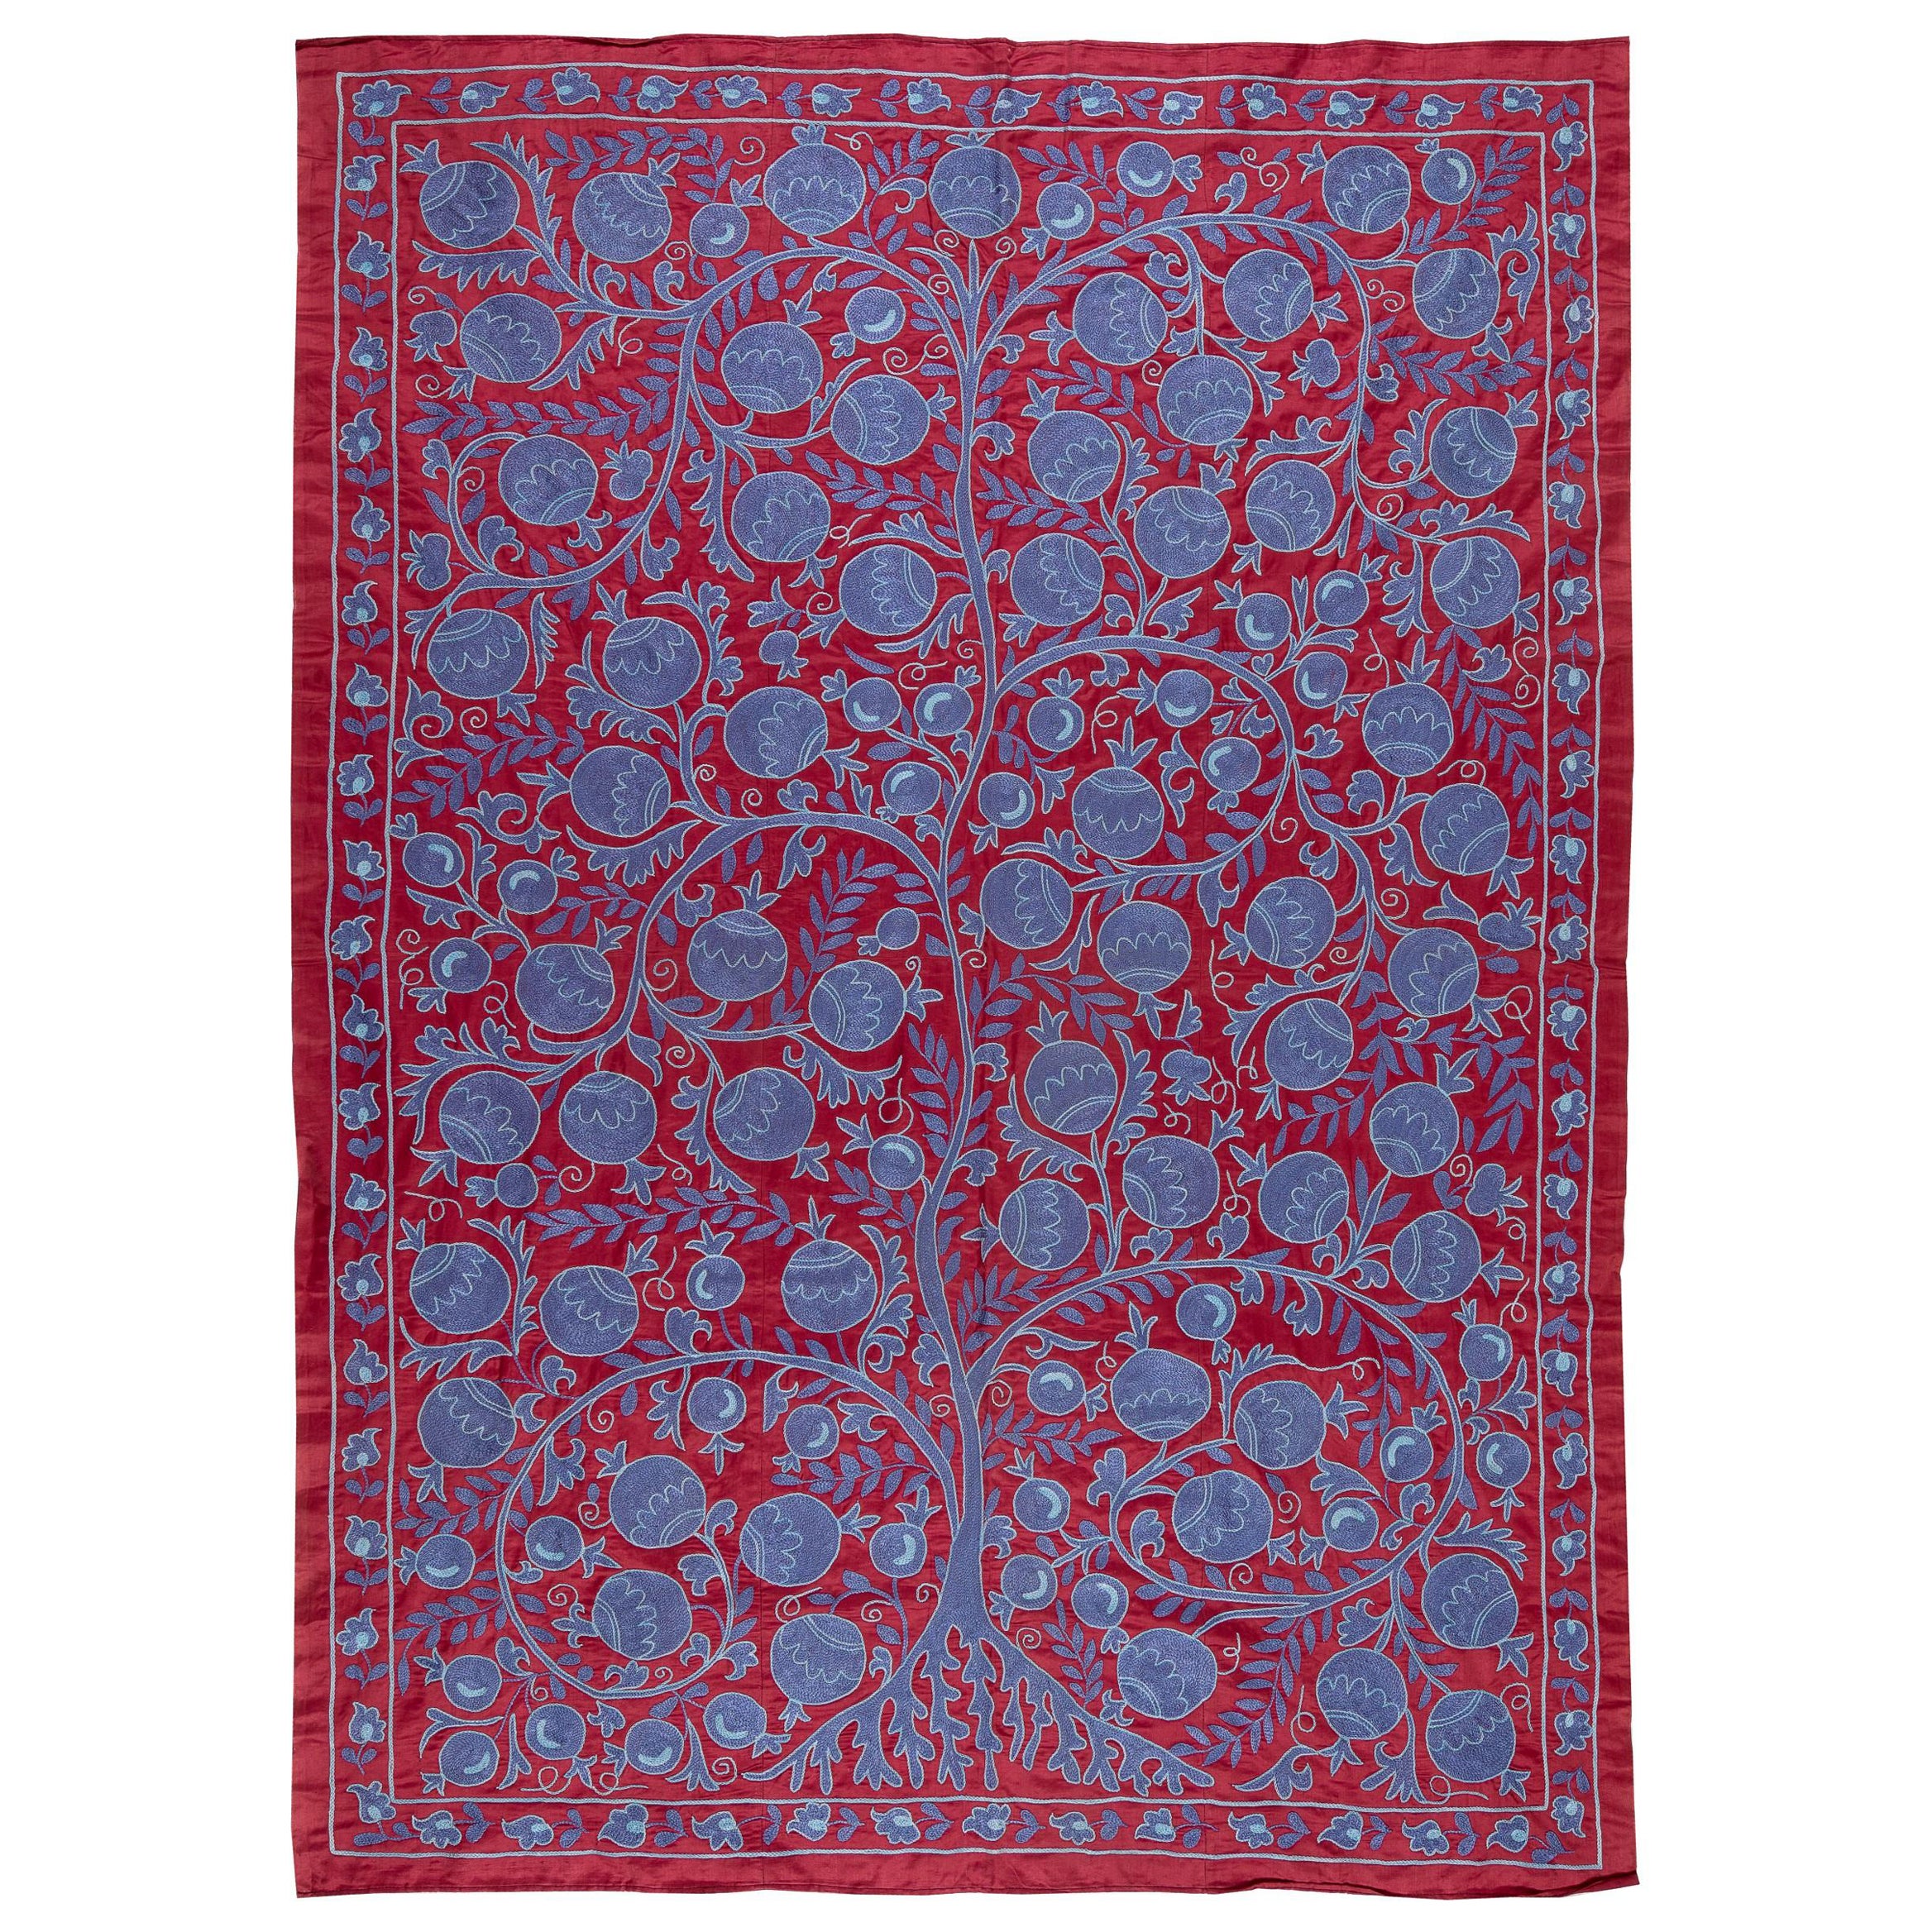 5x7 ft Pomegranate Tree Design Bedspread in Red & Purple, Silk Embroidery Throw